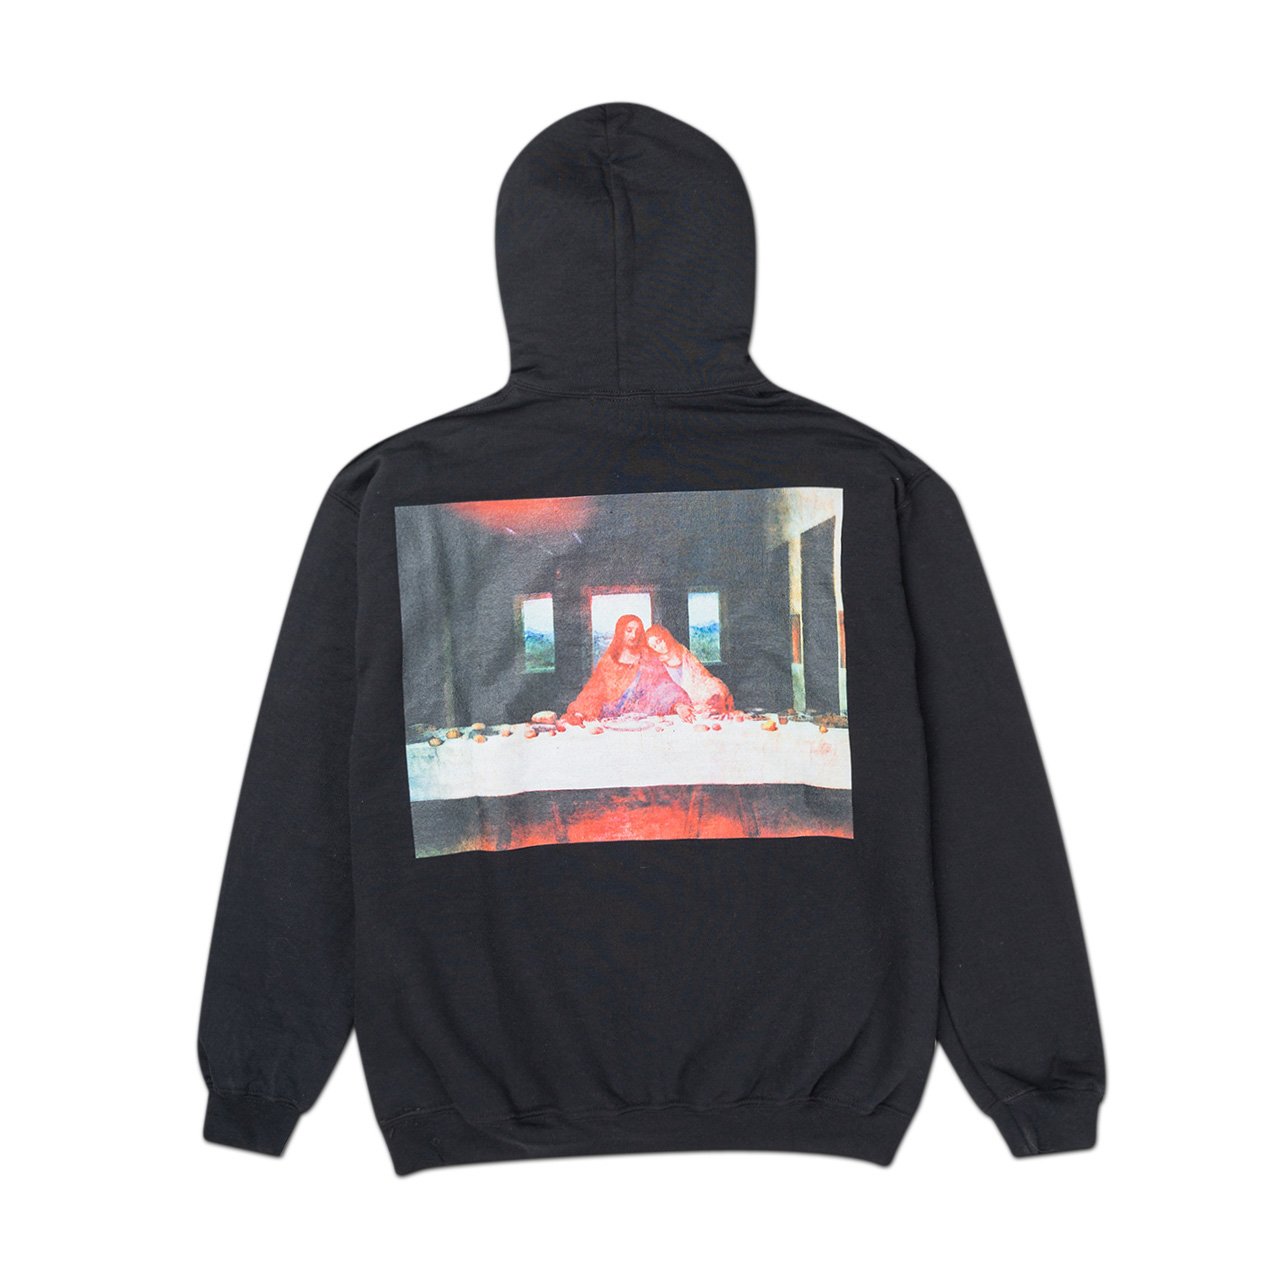 flagstuff "supper" hoodie (black) - 19aw-fs-40 - a.plus - Image - 2